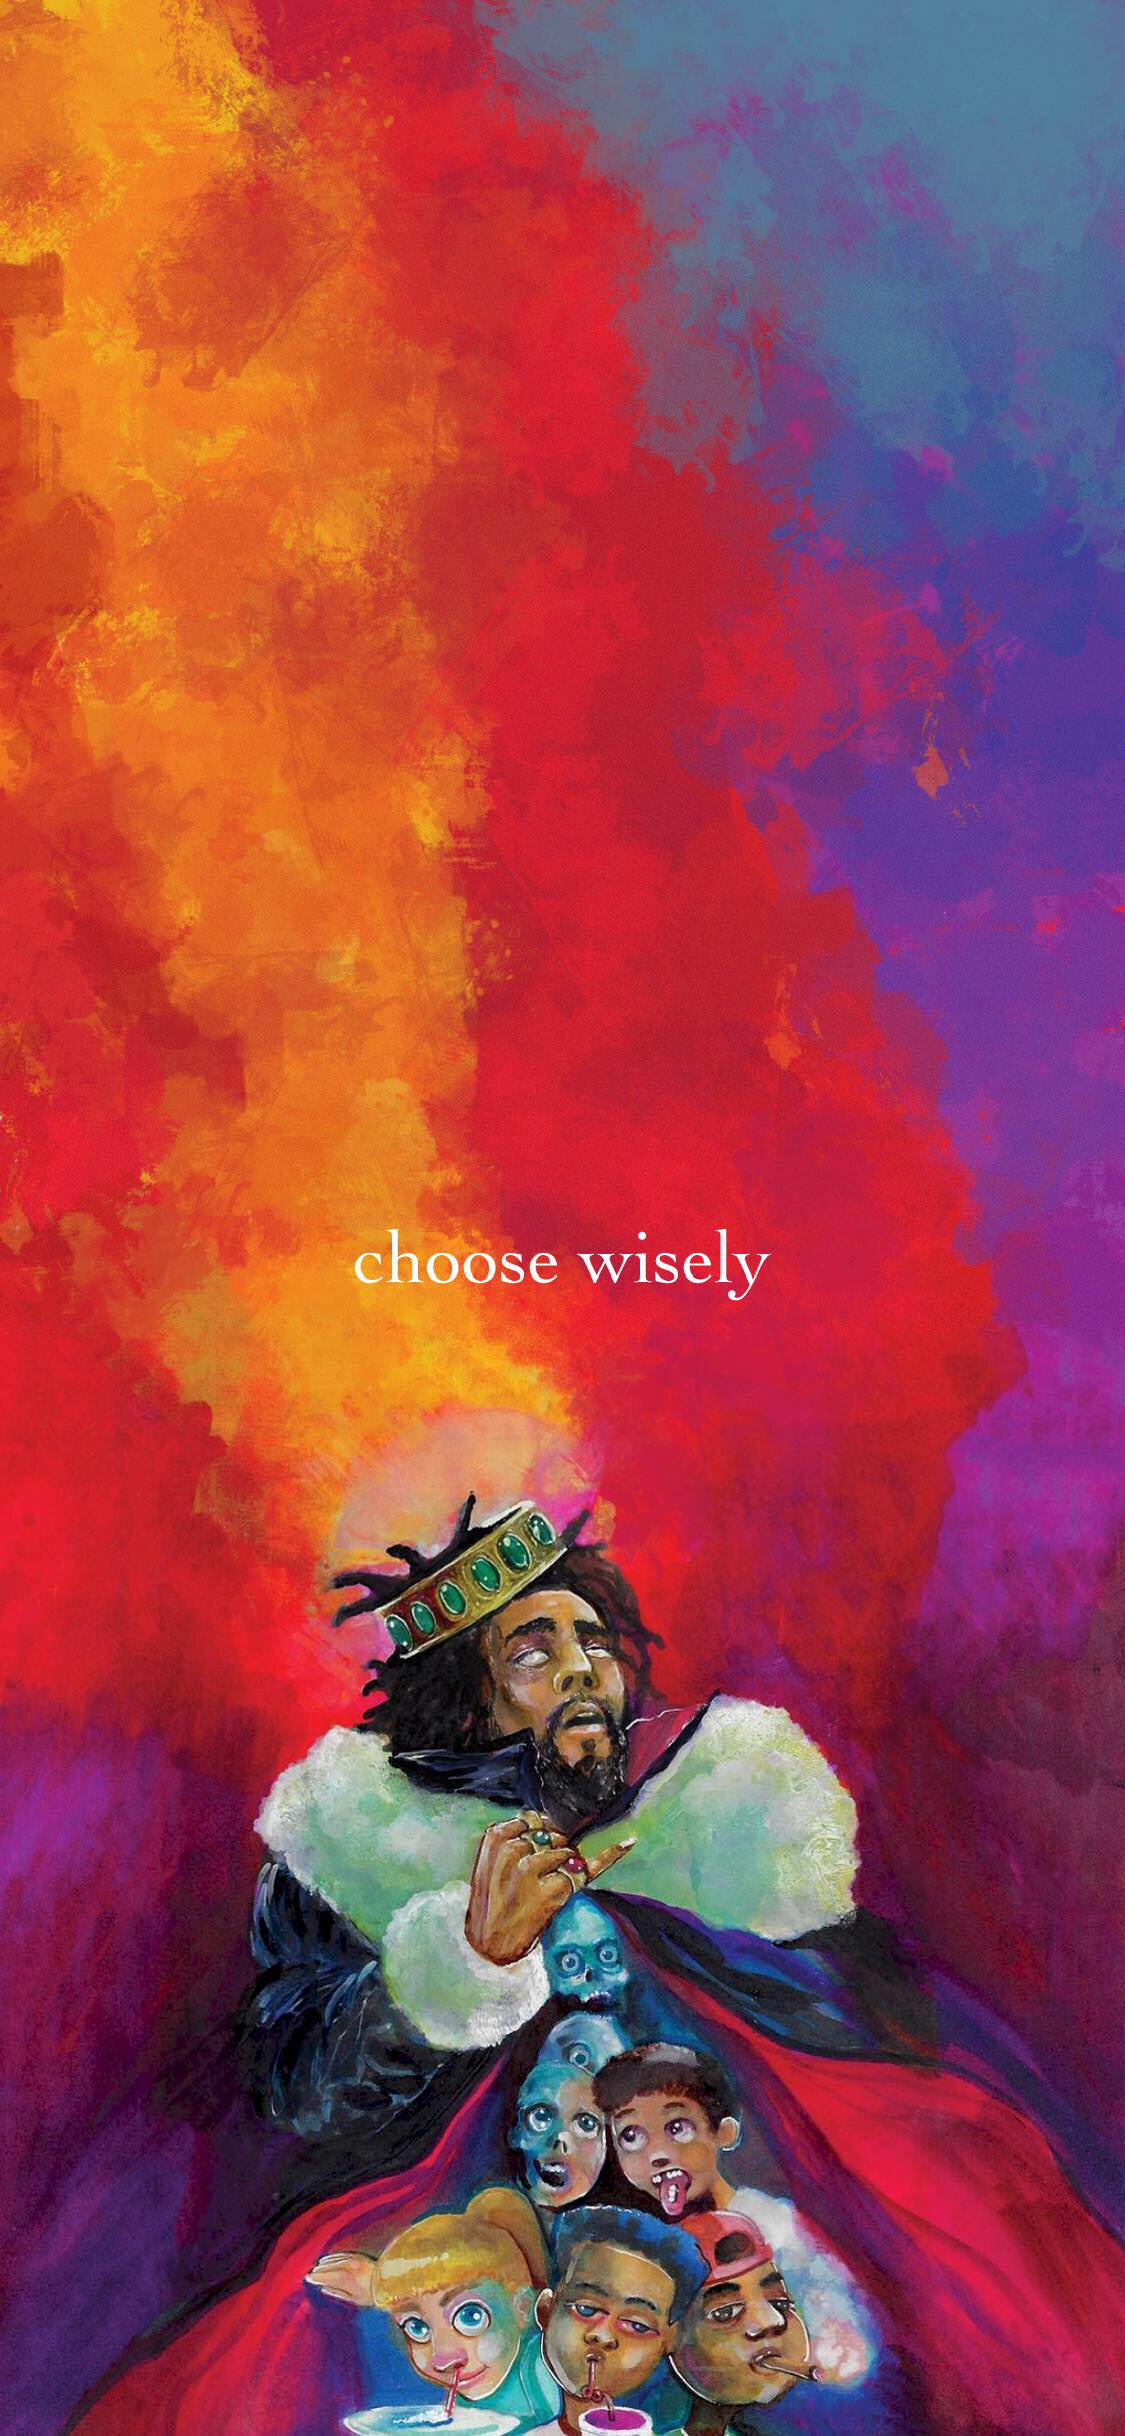 I made this KOD iPhone X Wallpaper which I thought was cool